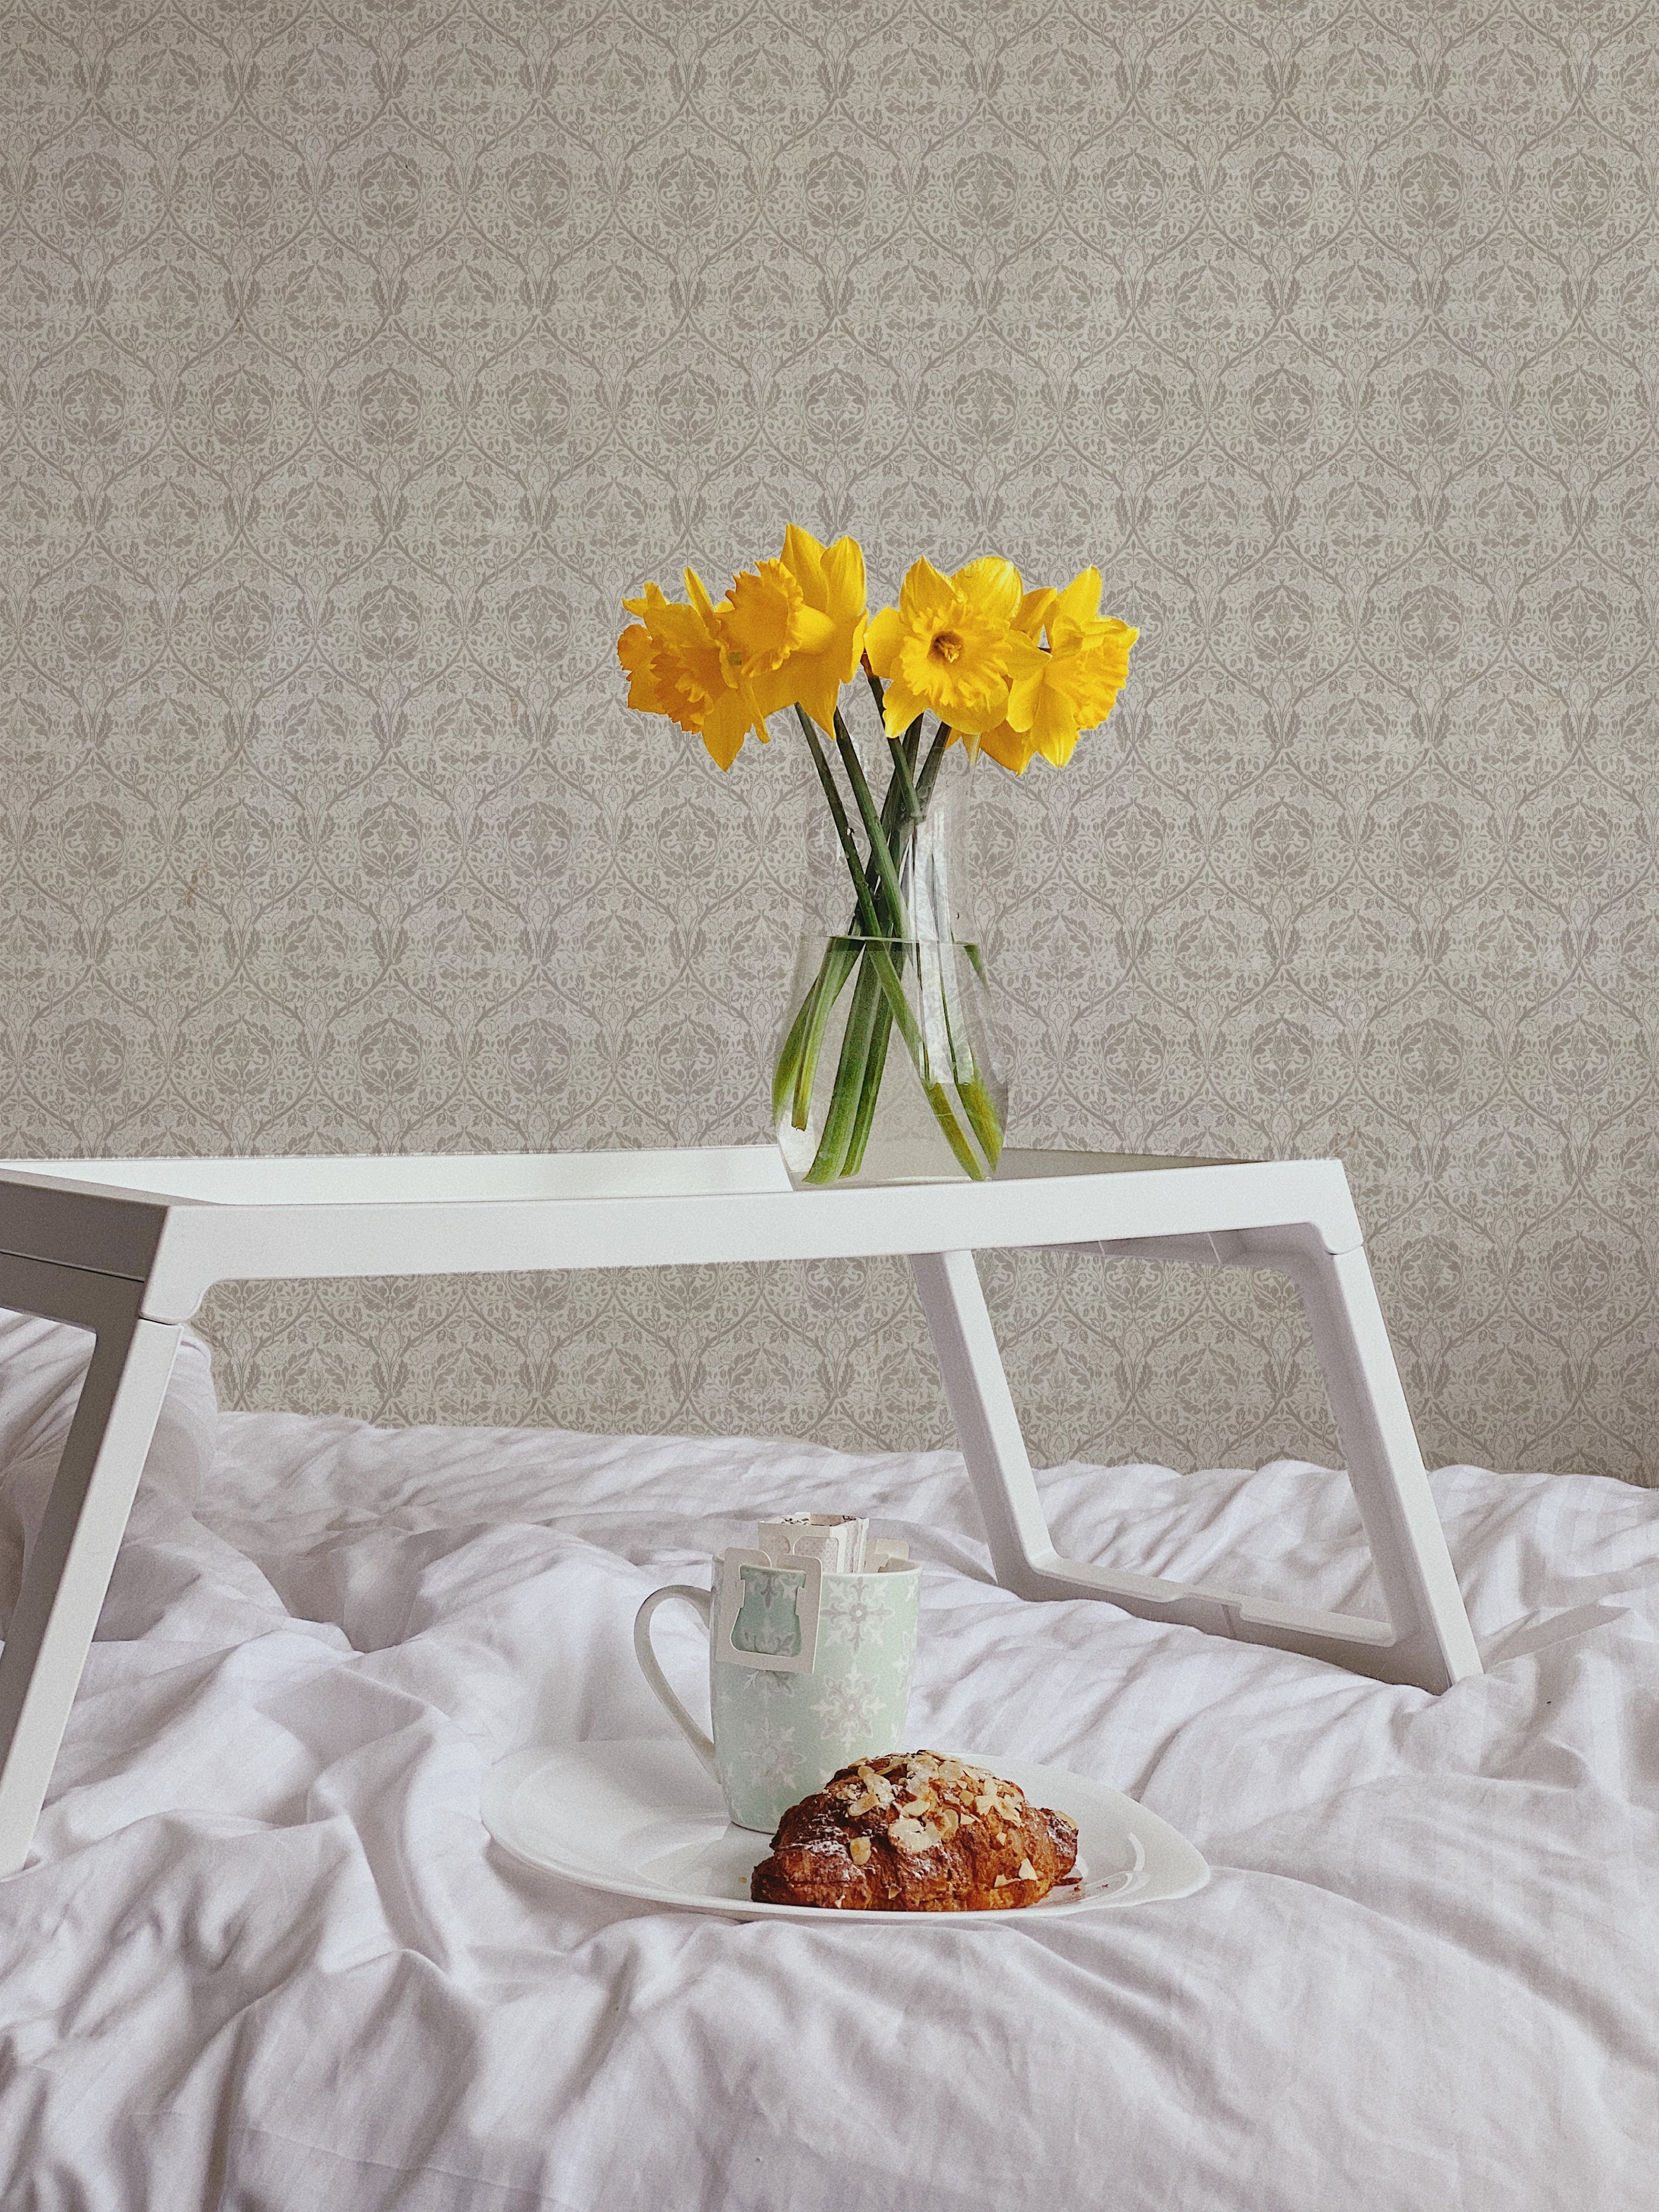 A cozy room setup featuring a white side table with a clear vase holding vibrant yellow daffodils. A white mug with a floral design and a scone on a plate are placed next to the vase, all atop a textured white bedspread. The room is decorated with an elegant gray and beige floral patterned wallpaper, providing a subtle and classic backdrop.